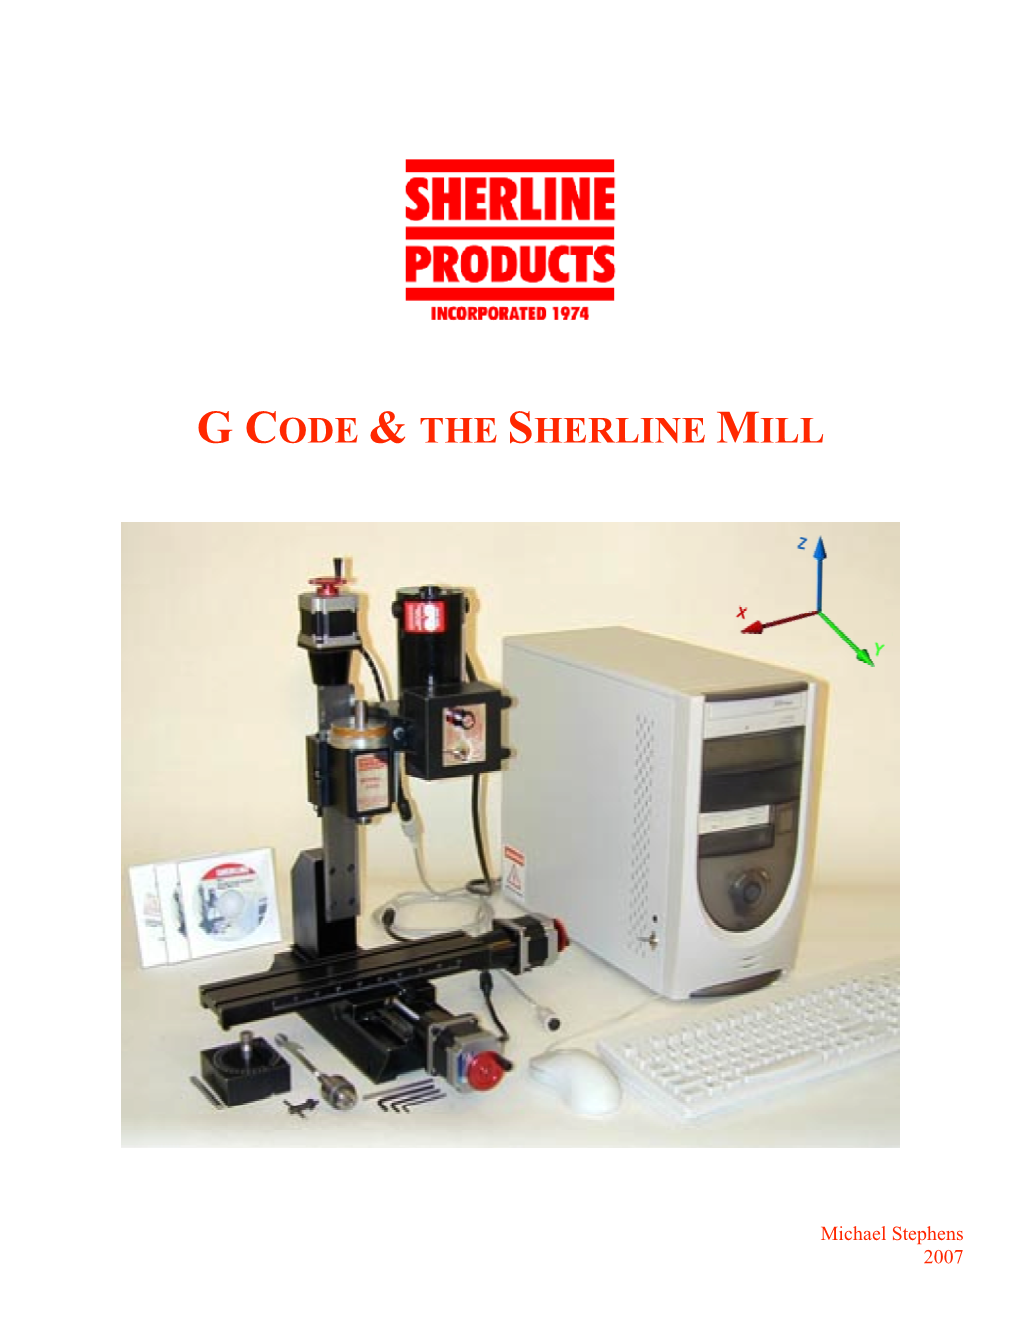 G Code & the Sherline Mill